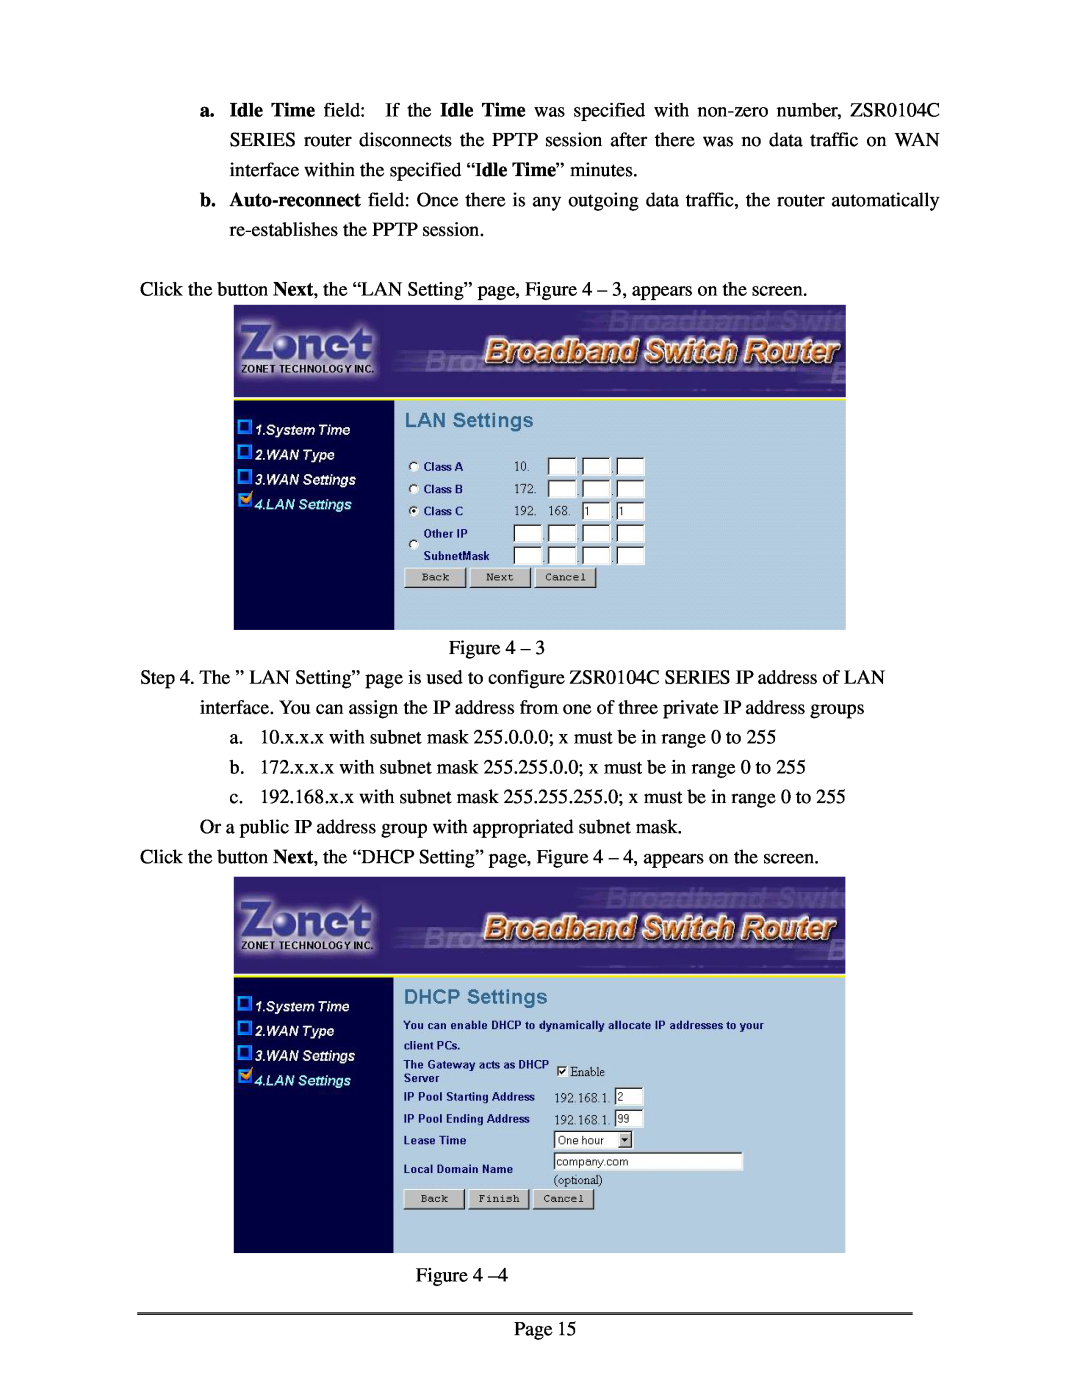 Zonet Technology ZSR0104C Series user manual a. 10.x.x.x with subnet mask 255.0.0.0 x must be in range 0 to, Page 